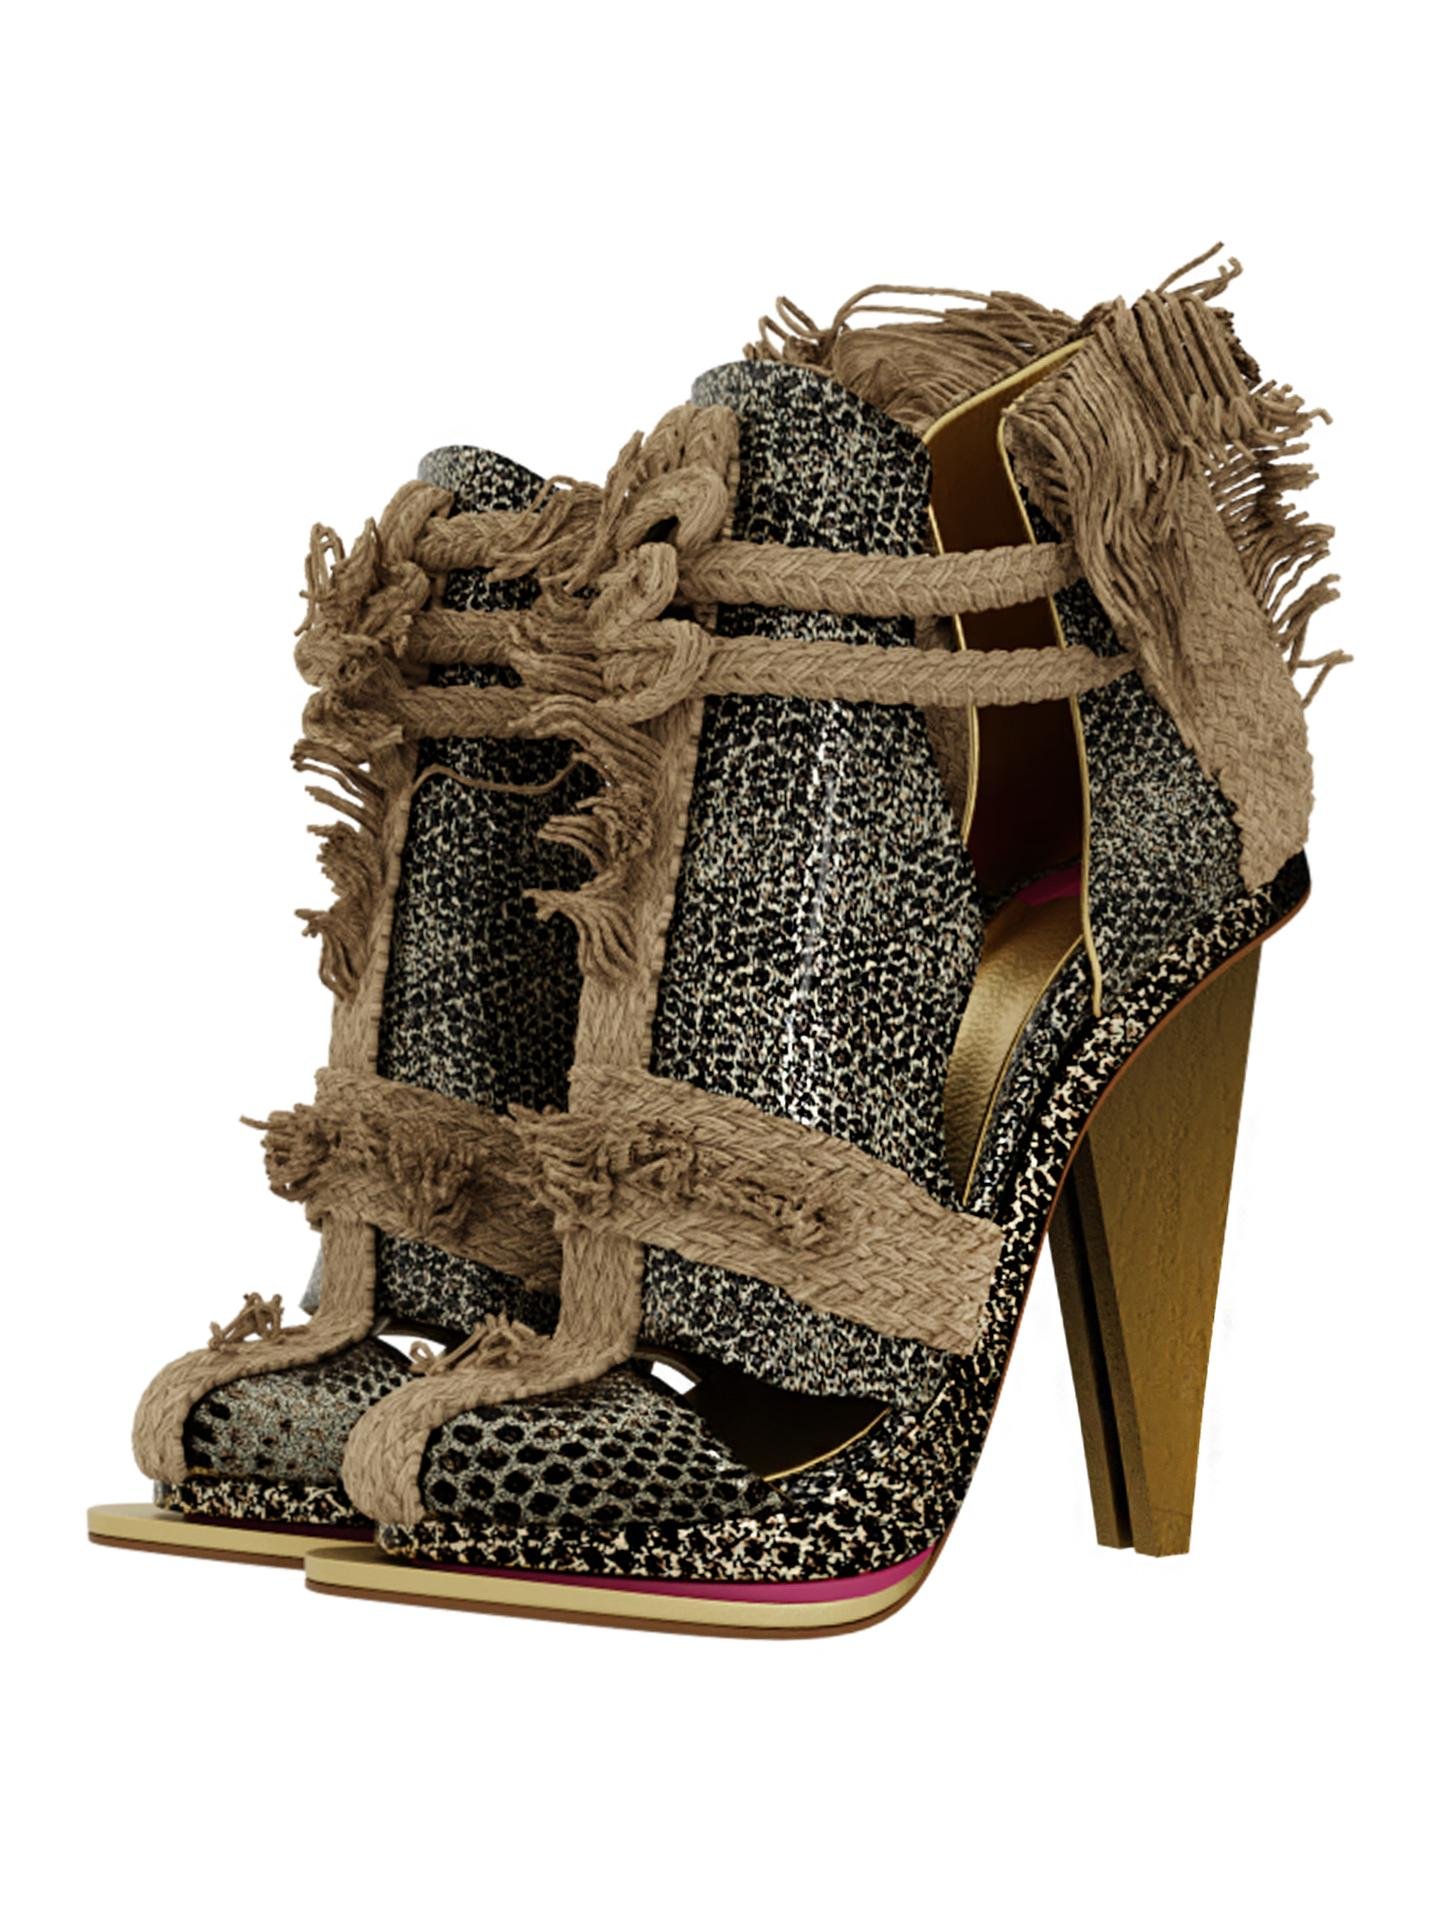 Rope Sandal by PLATYSHOES